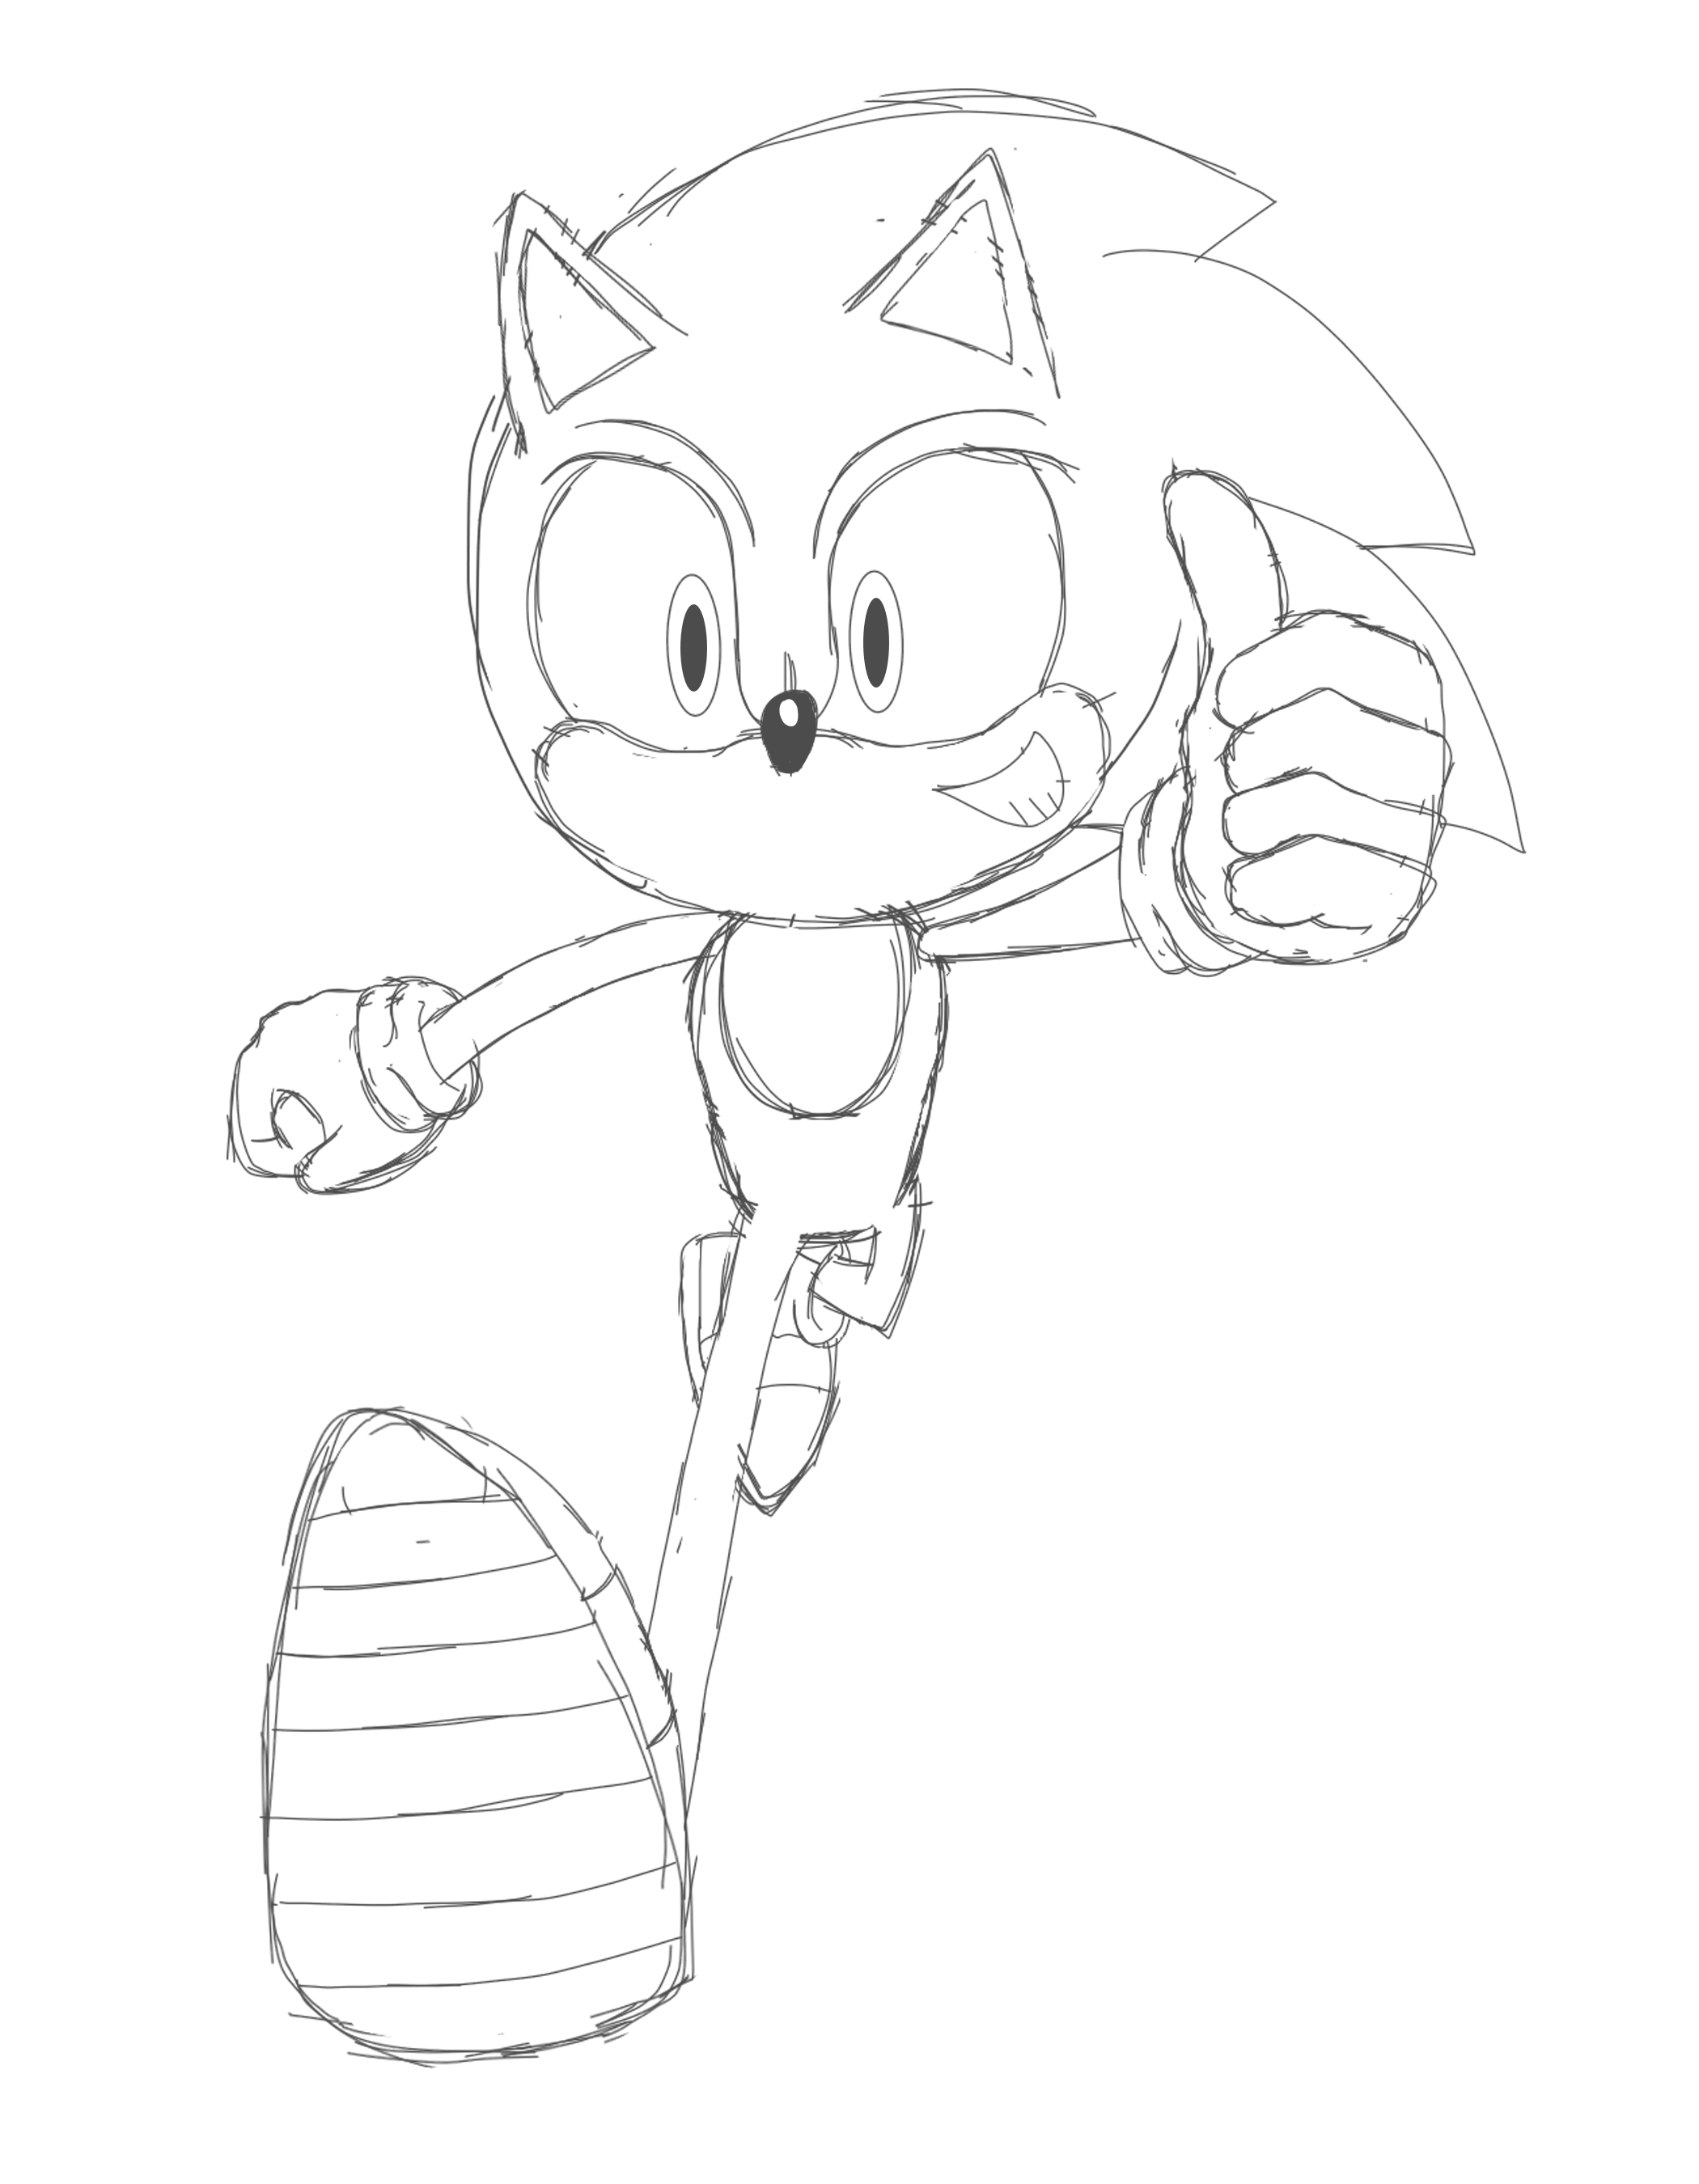 Sonic running mission by creamsfriend on